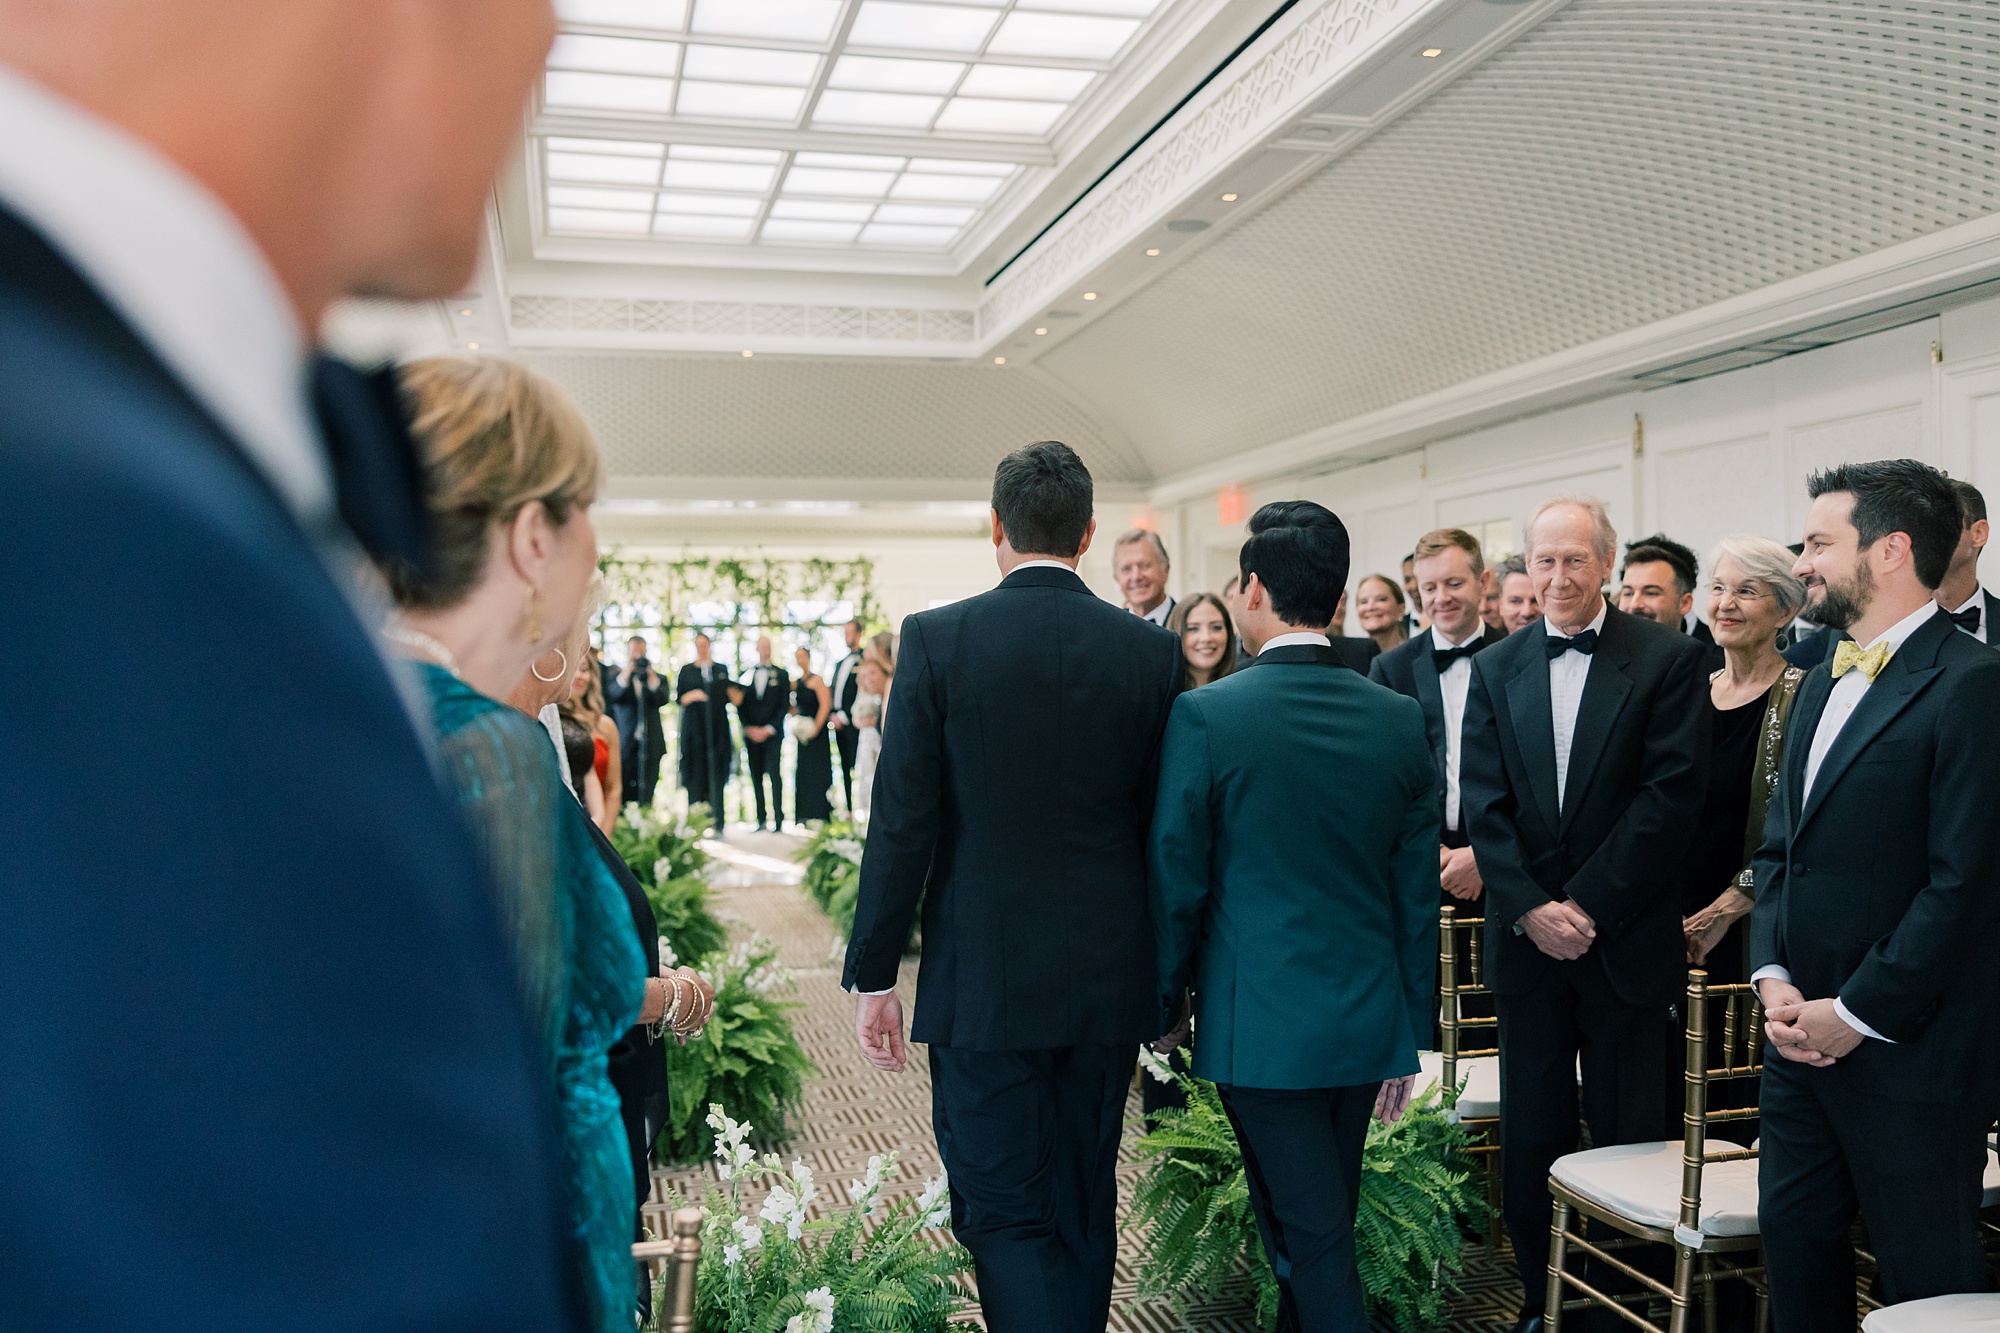 grooms hold hands walking down aisle for ceremony together 